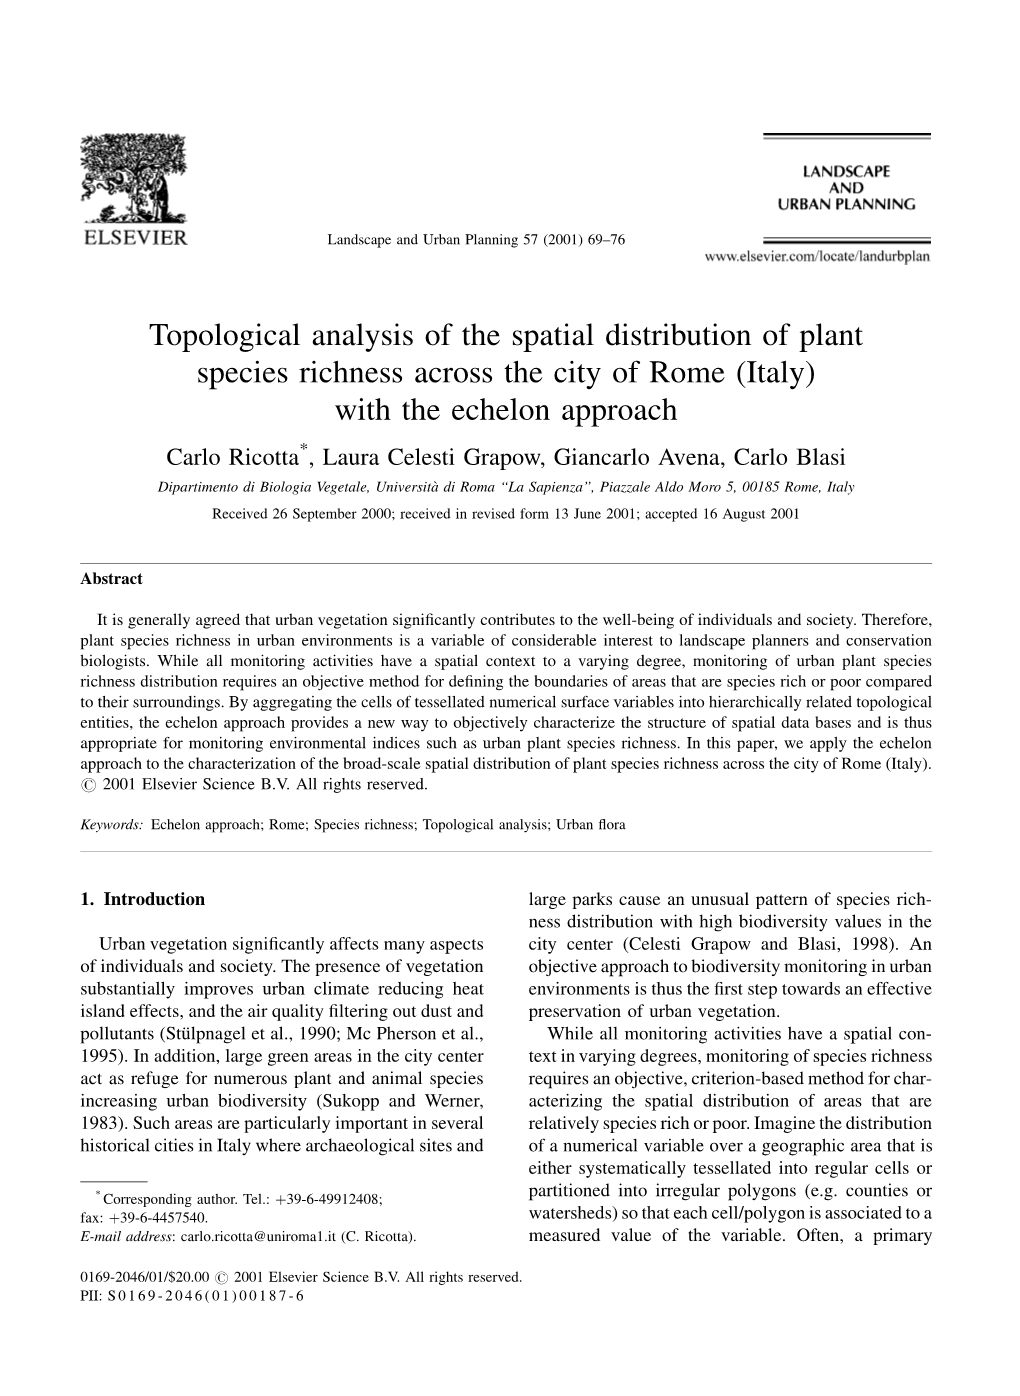 Topological Analysis of the Spatial Distribution of Plant Species Richness Across the City of Rome